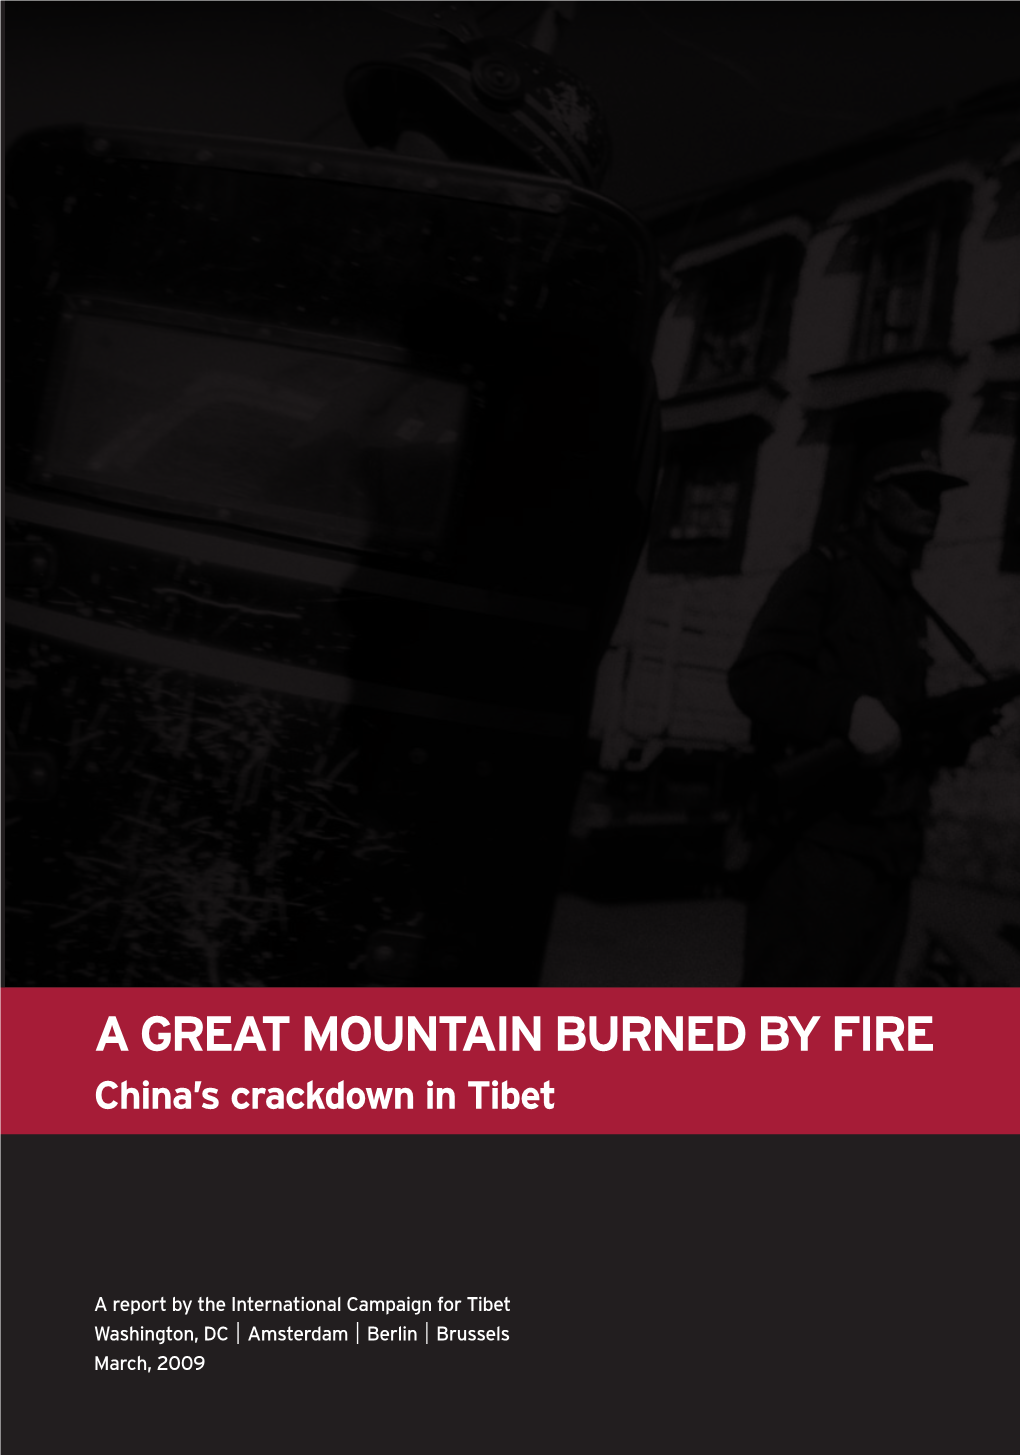 A Great Mountain Burned by Firesq:Layout 1 2/3/09 16:51 Page 1 RA ONANBRE YFIRE: by BURNED MOUNTAIN GREAT a Hn’ Rcdw Ntibet in Crackdown China’S